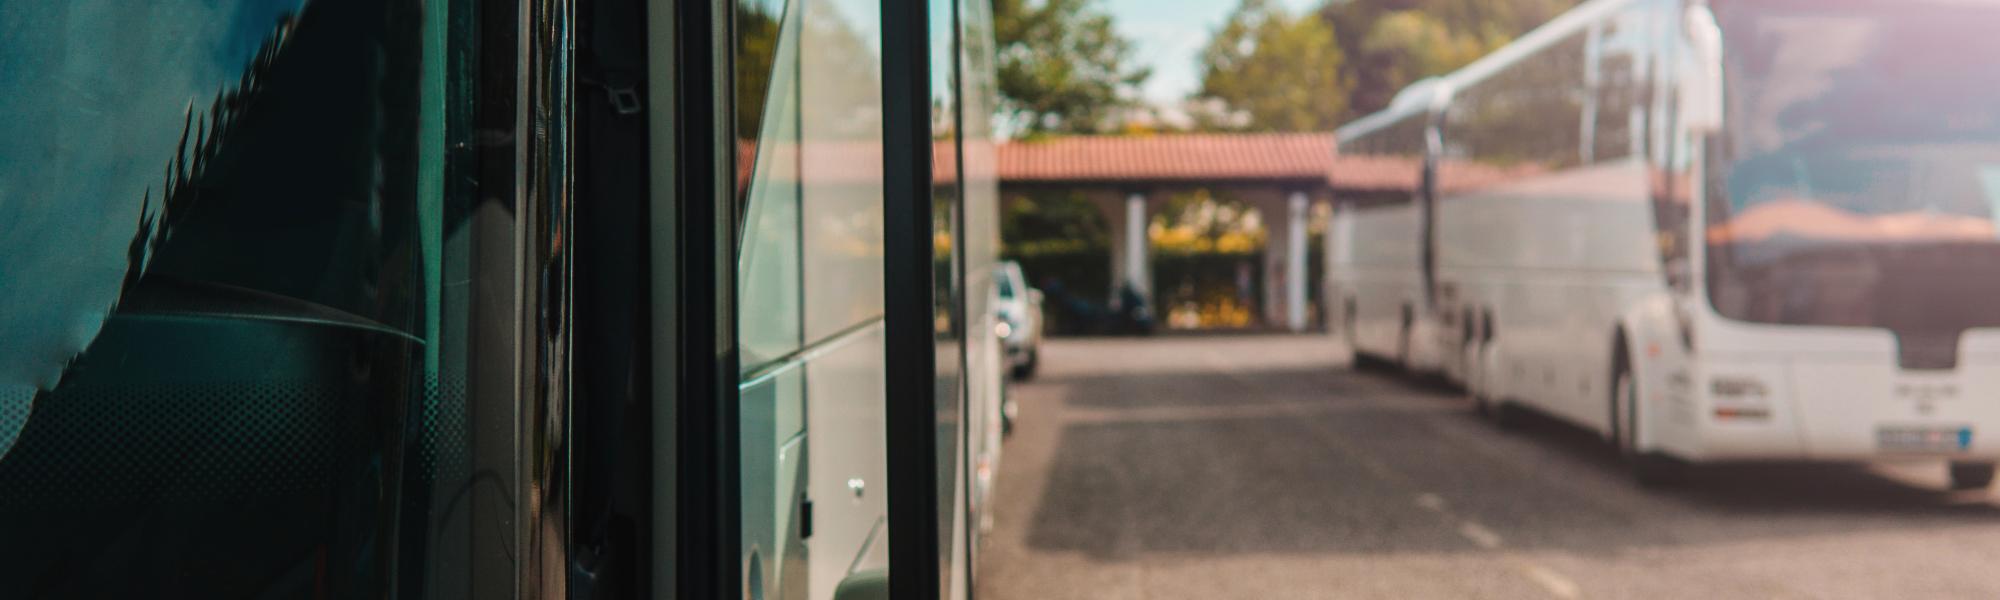 Clarity on EU Mobility Package rules for bus and coach drivers